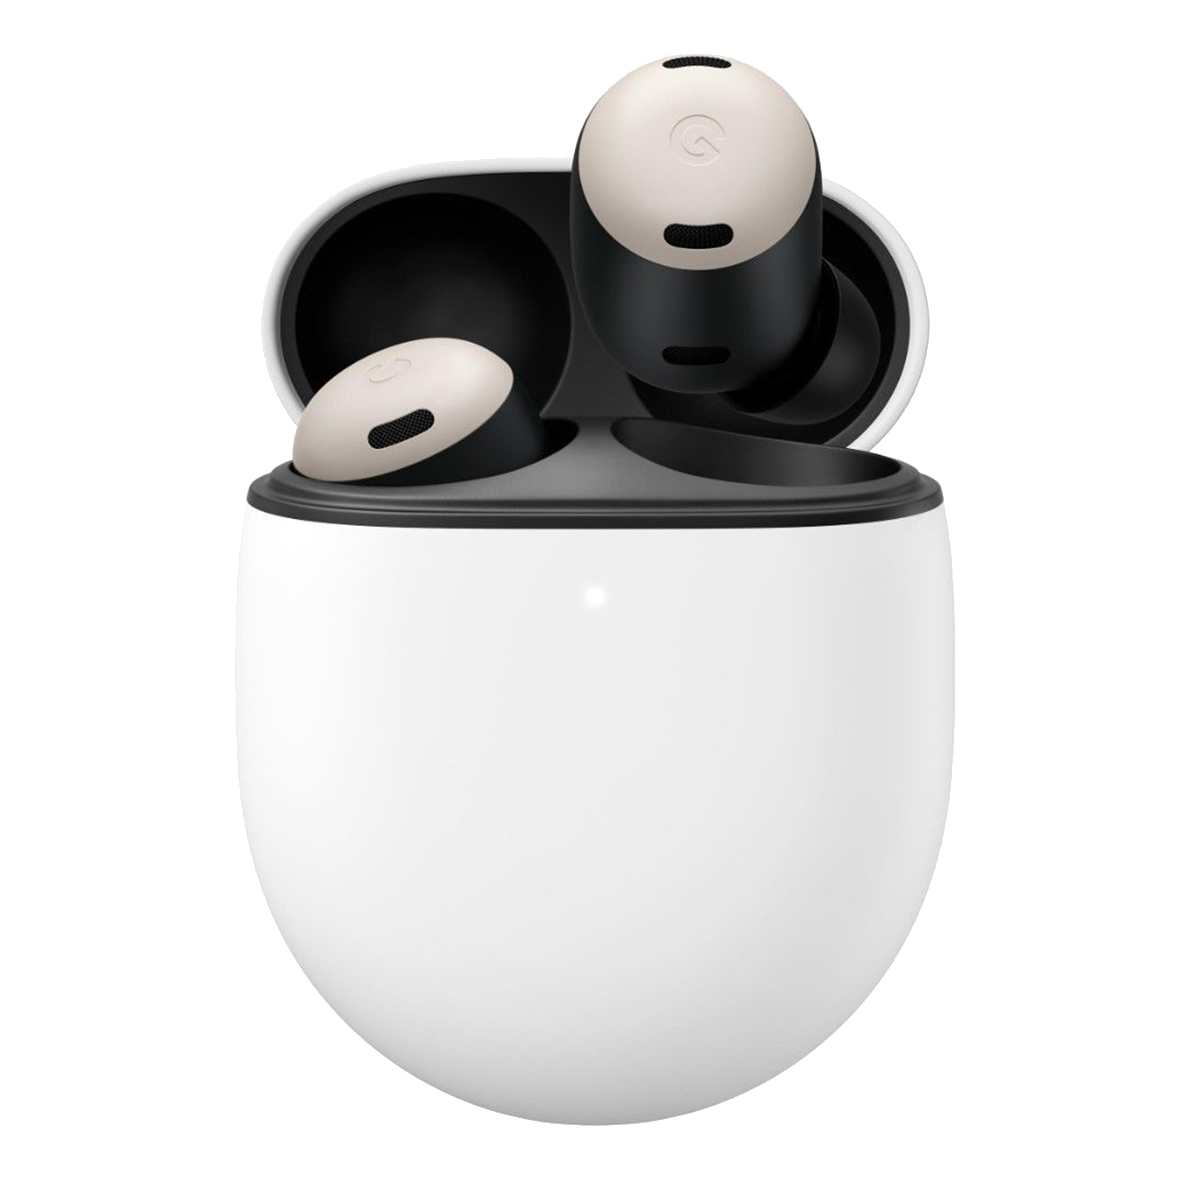 Ourfriday | Google Pixel Buds Pro - Porcelain